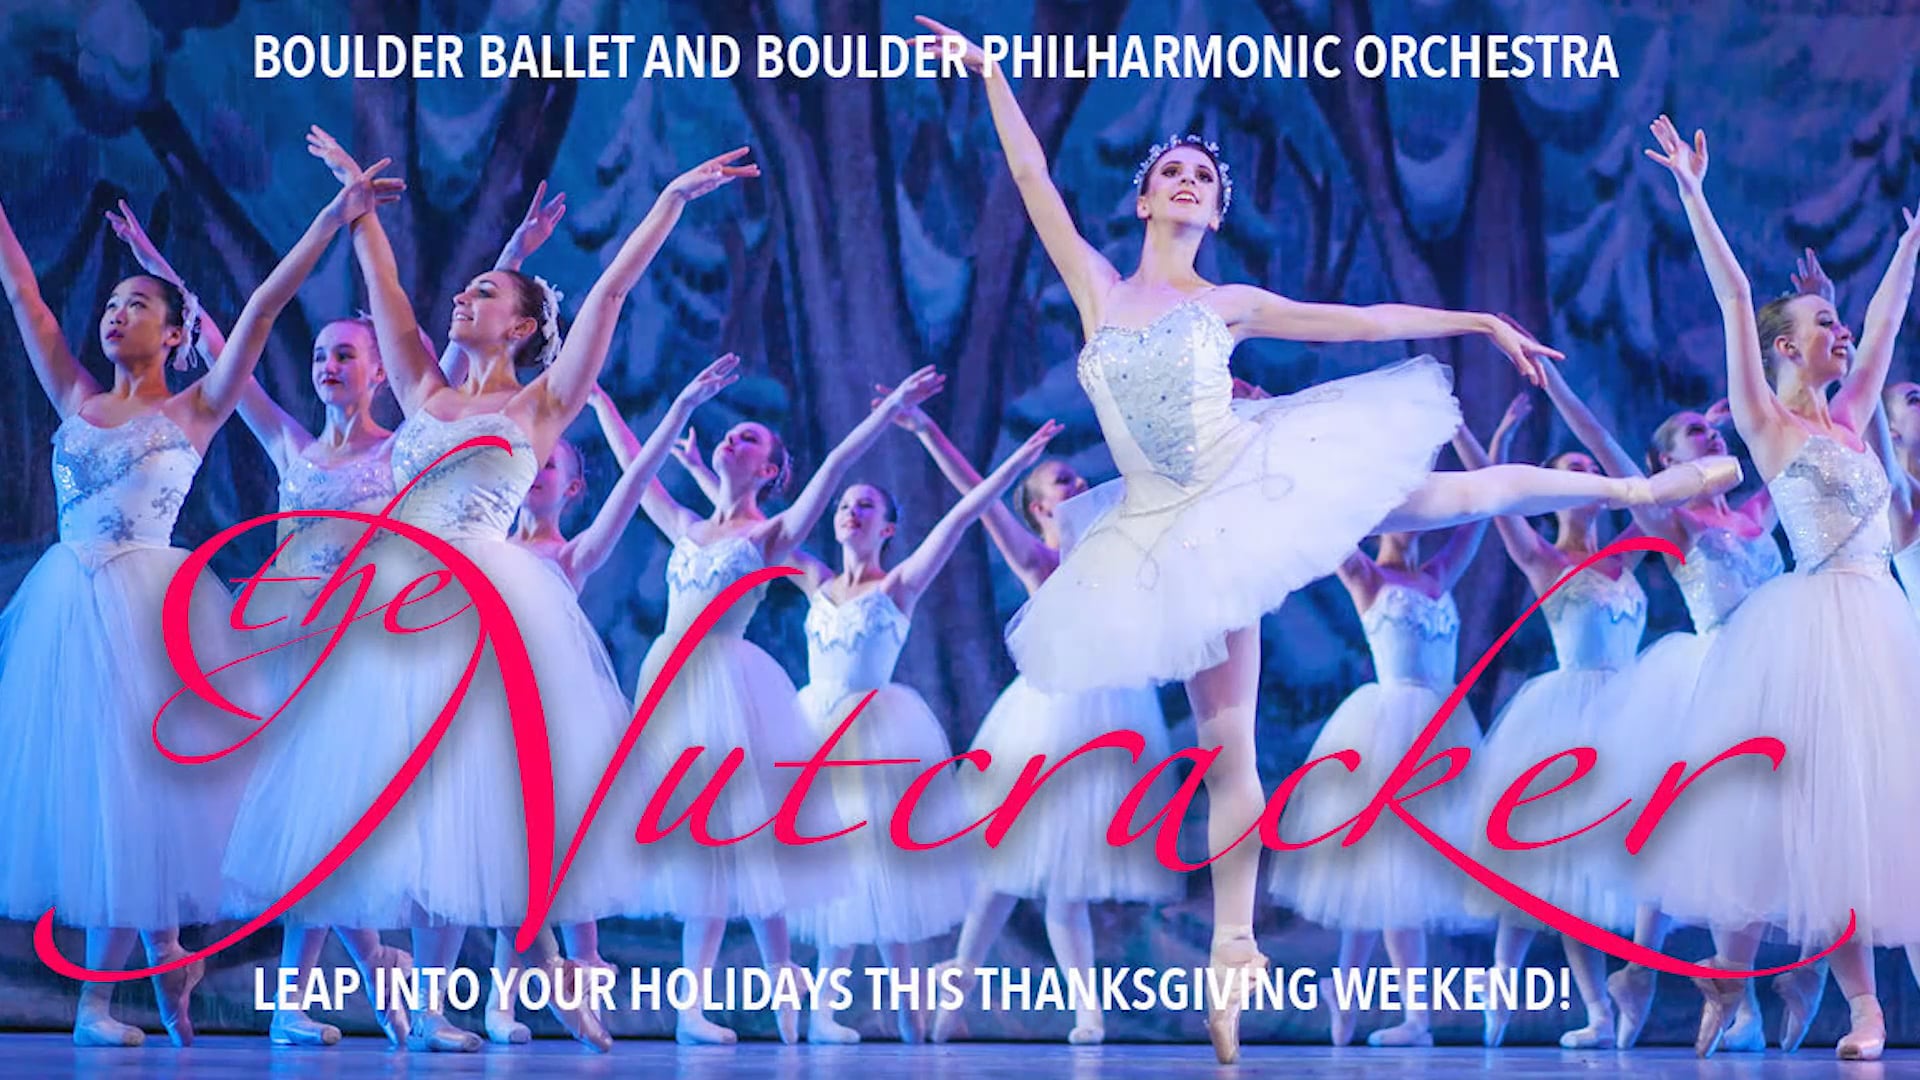 Behind The Scenes at The Nutcracker with The Boulder Ballet